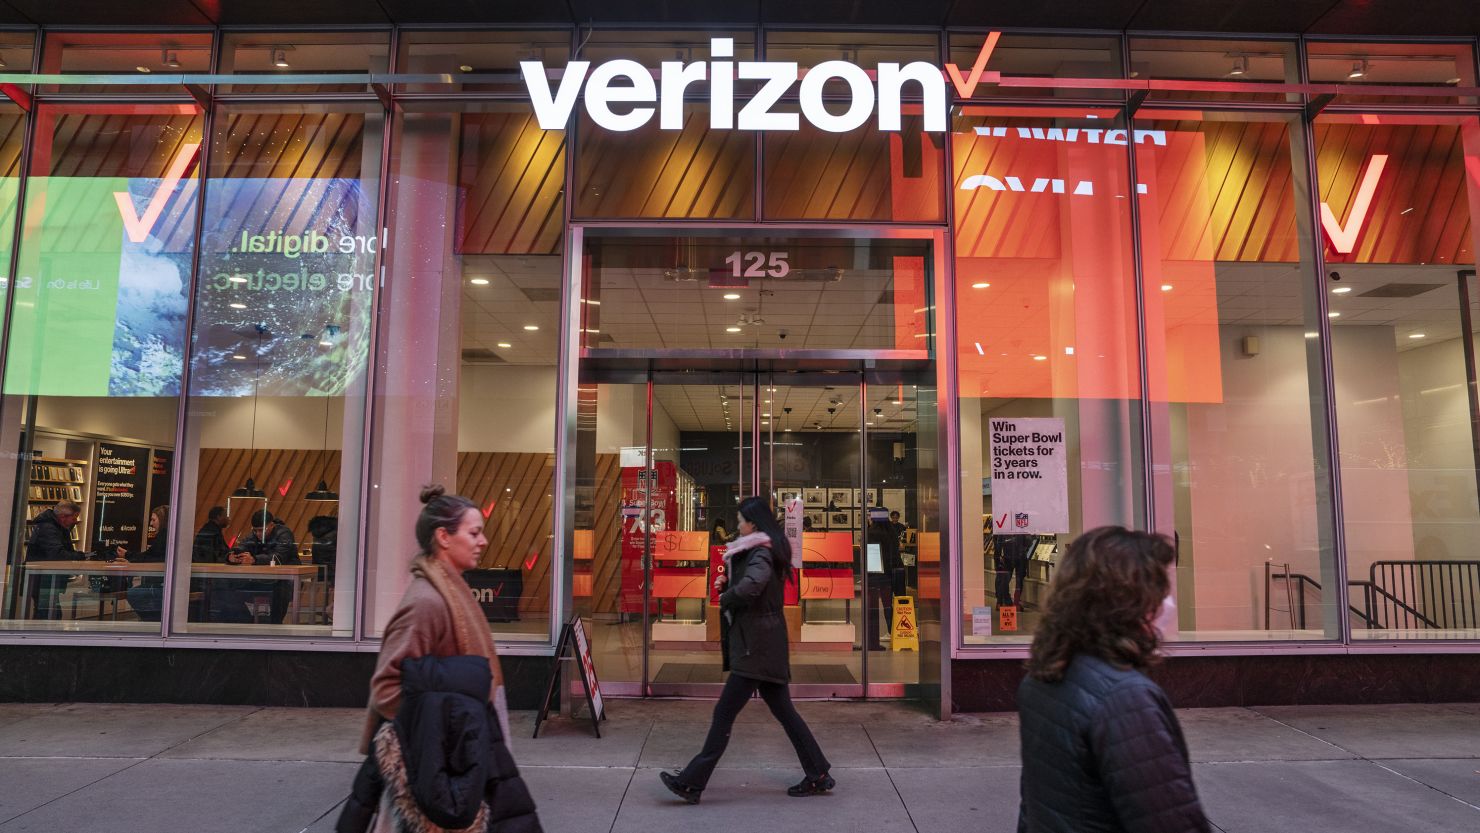 A Verizon store in New York, US, on Friday, Jan. 20, 2023. Verizon Communications Inc. is schedule to release earnings figures on January 24.